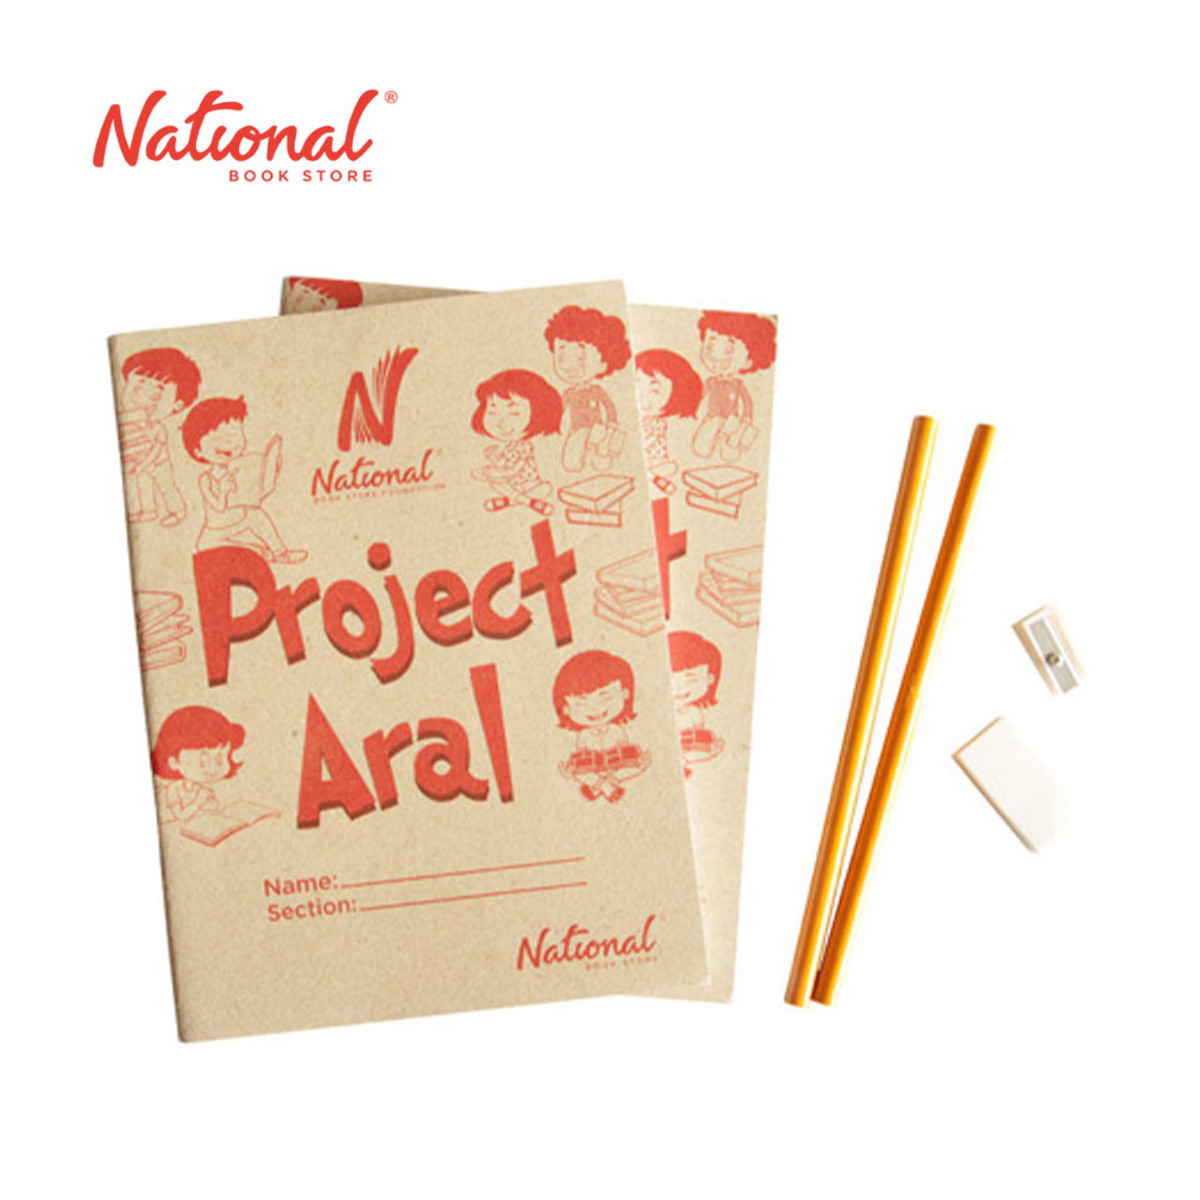 Project Aral Kit 1 (without slippers) - NBS Foundation - Donation